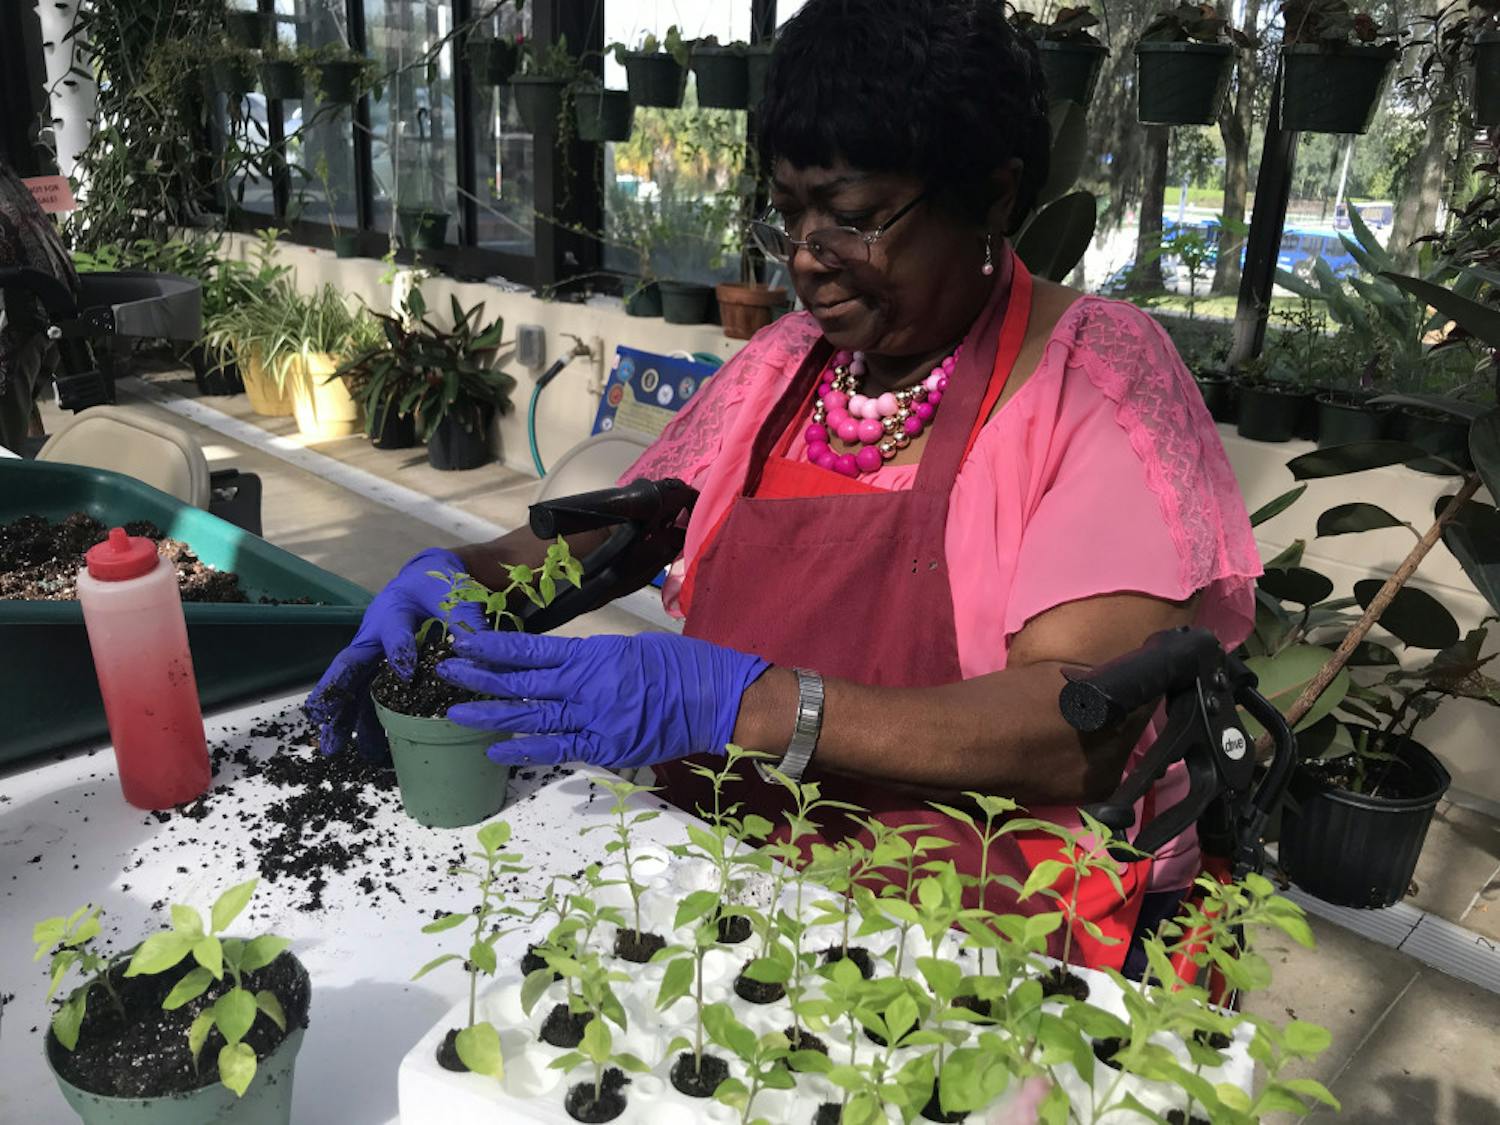 Dessie Robinson, a United States veteran and regular attendee of horticulture therapy, transfers young rabbit ear seedlings into pots. Robinson has attended the program for two semesters after hearing about it from the social work department at the VA. 